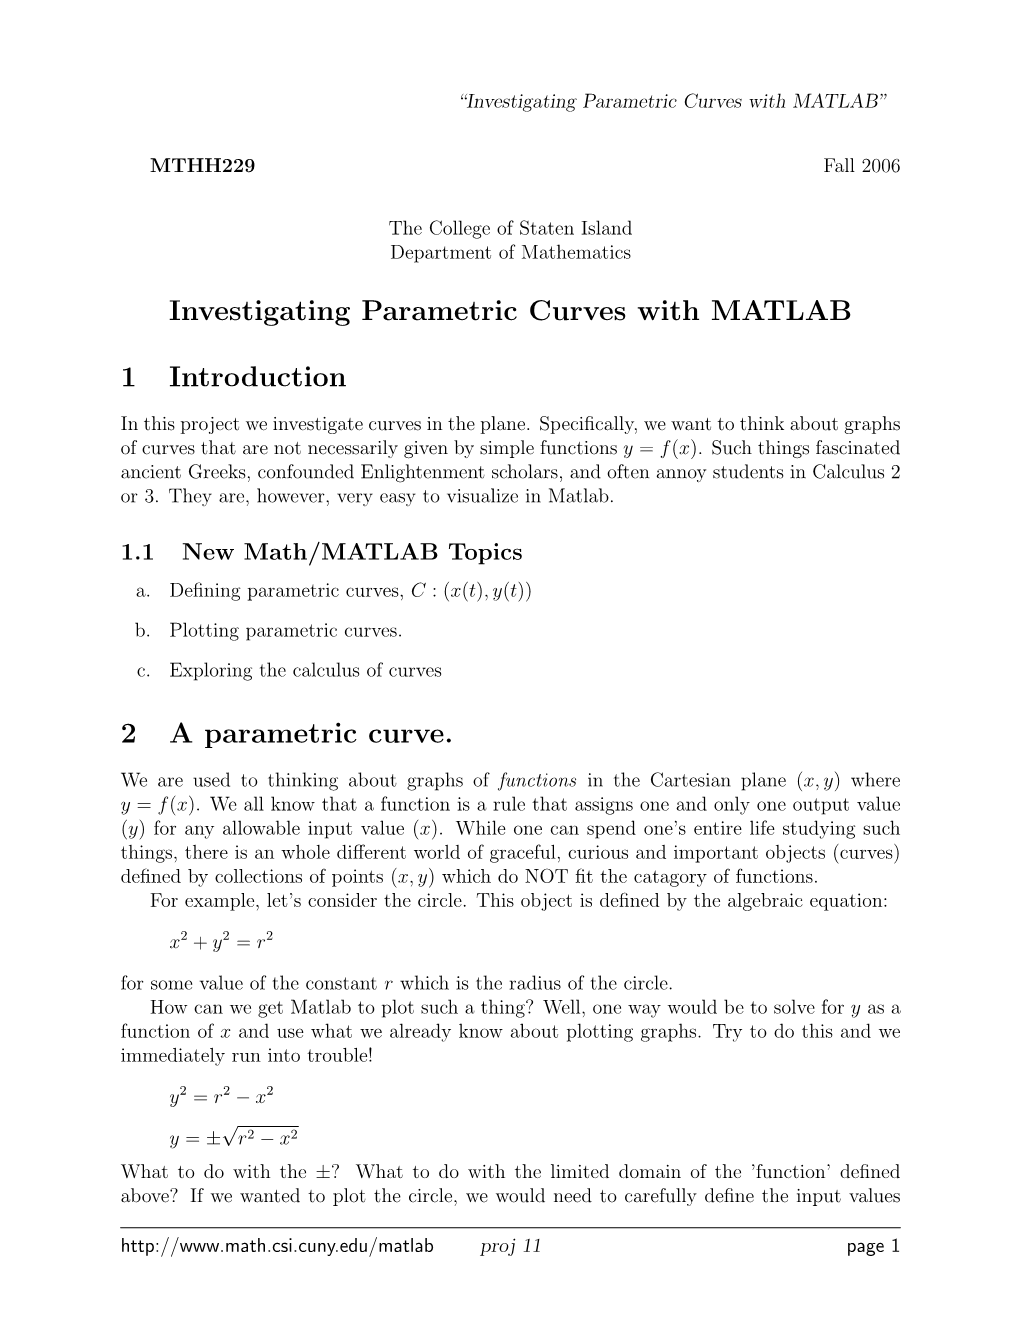 Investigating Parametric Curves with MATLAB 1 Introduction 2 A